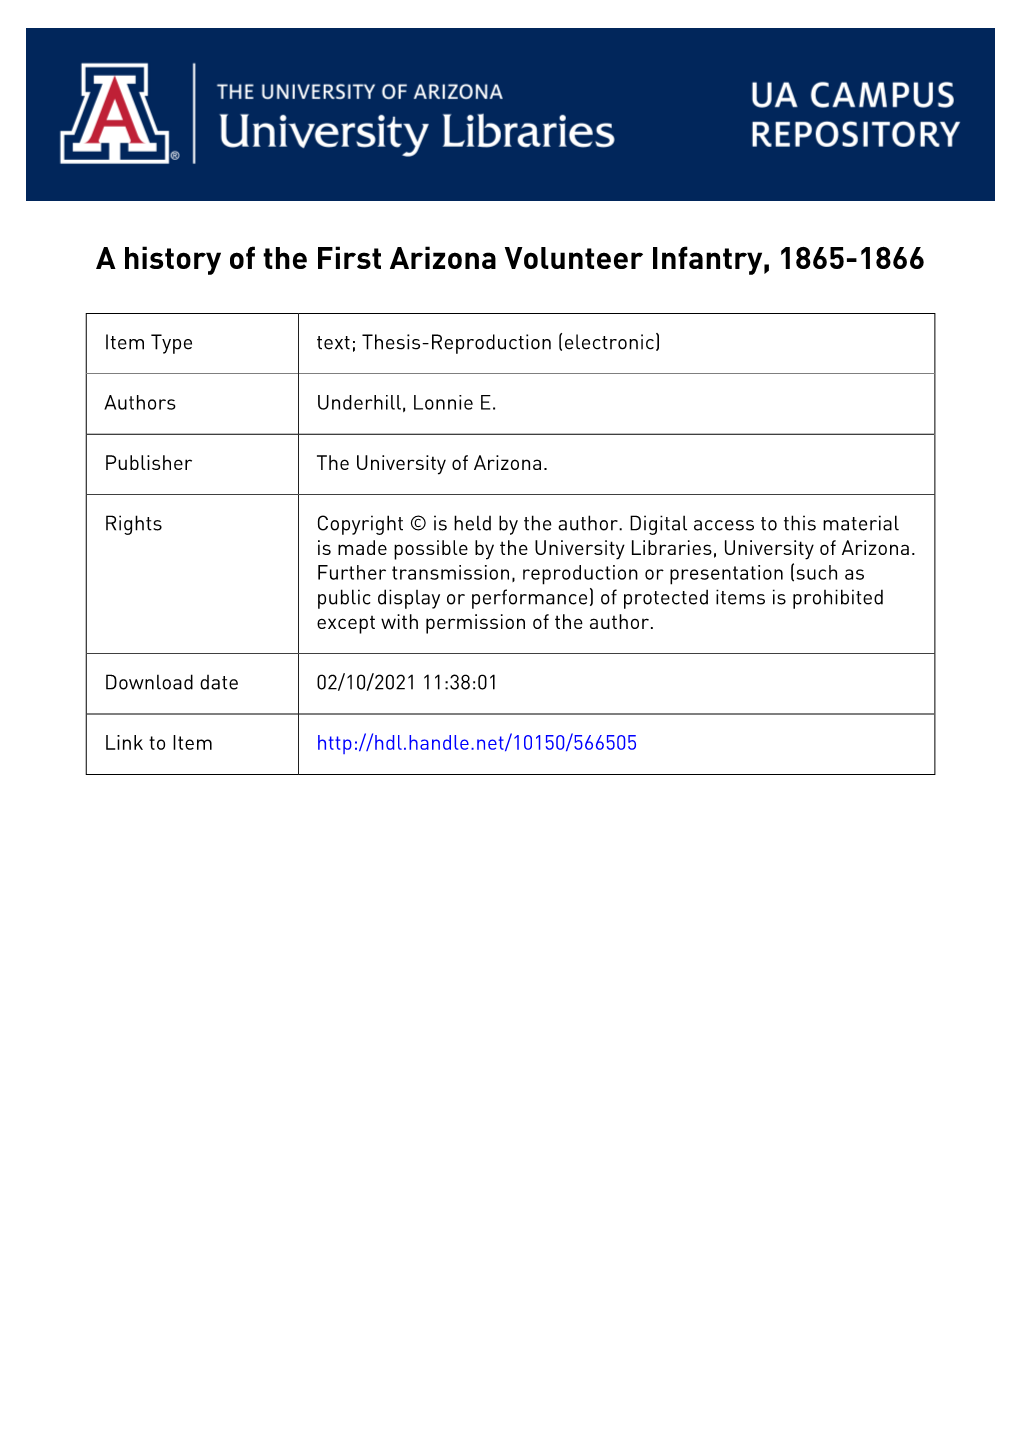 A History of the First Arizona Volunteer Infantry, 1865-1866